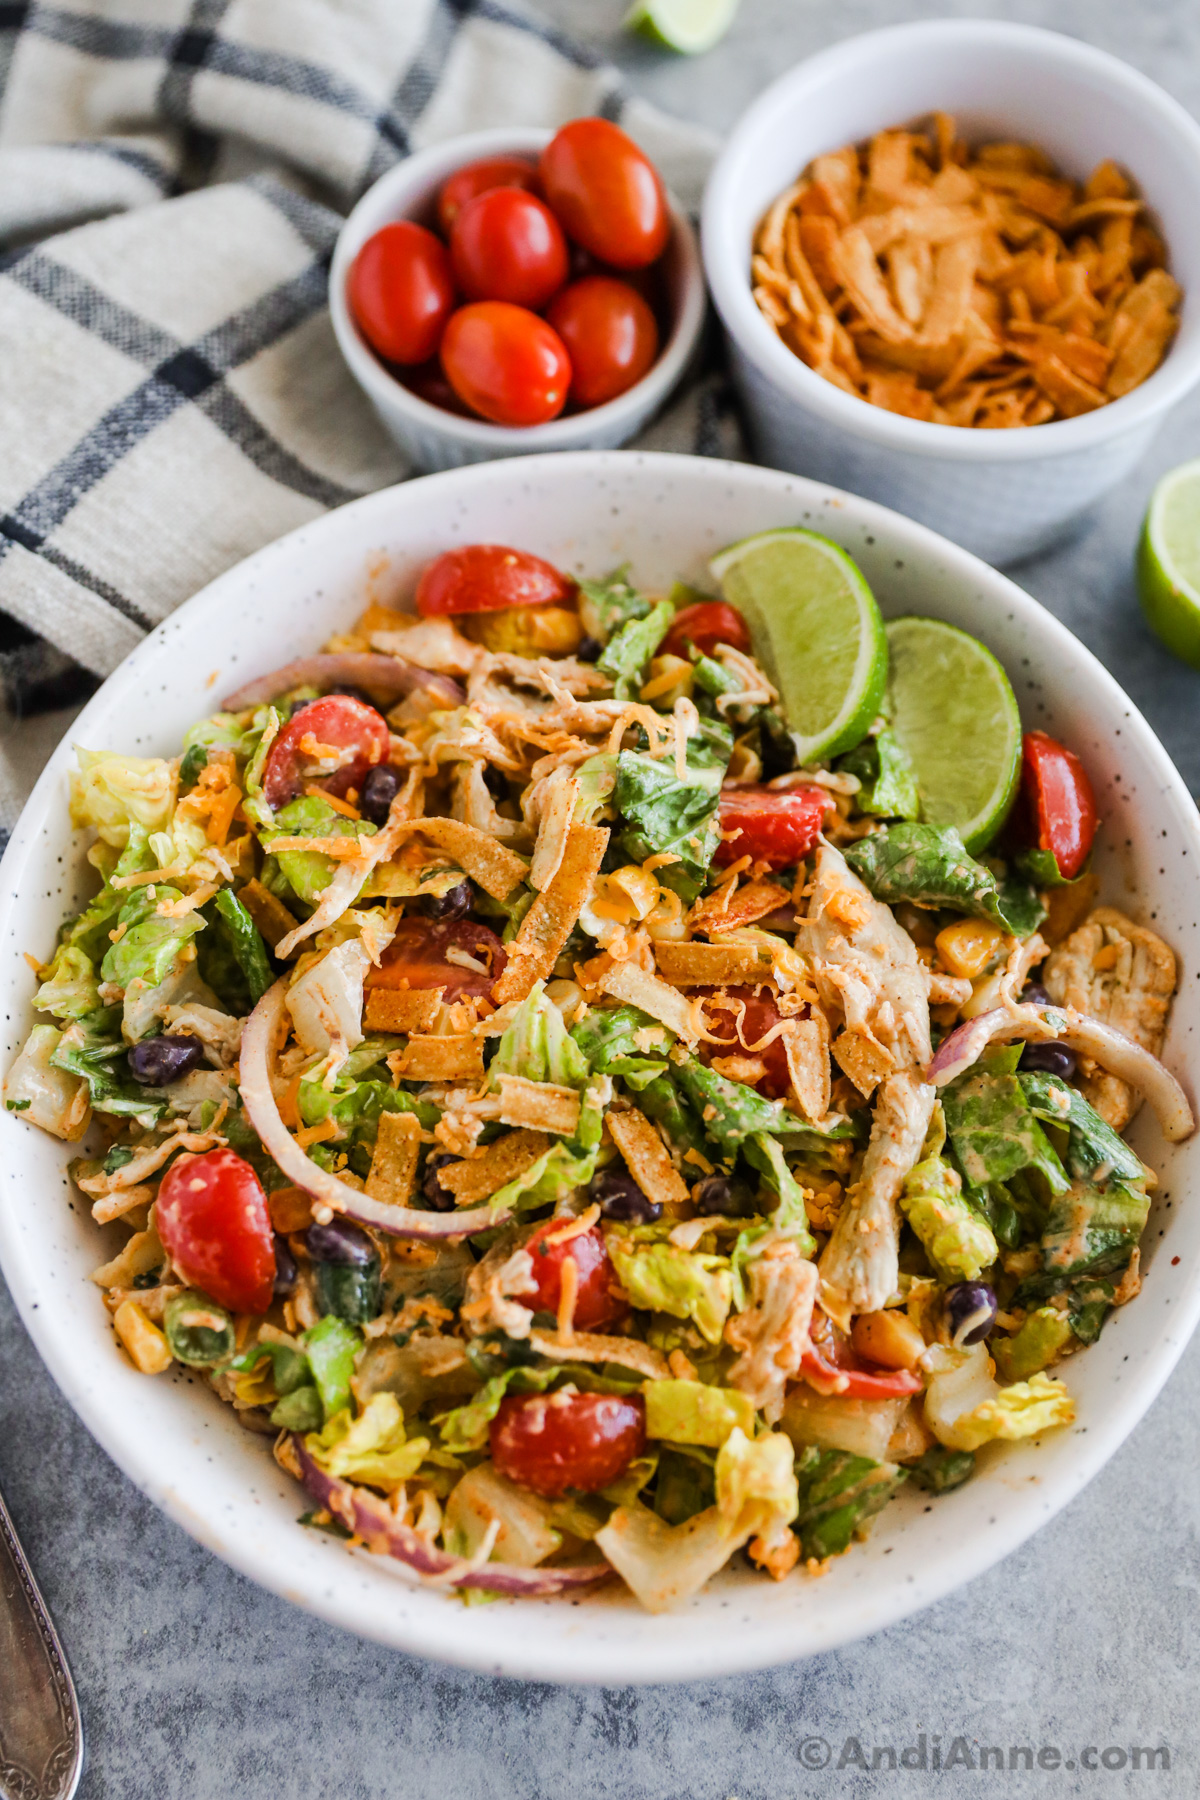 Chicken taco salad in a white bowl with small bowls of cherry tomatoes and tortilla strips beside it.